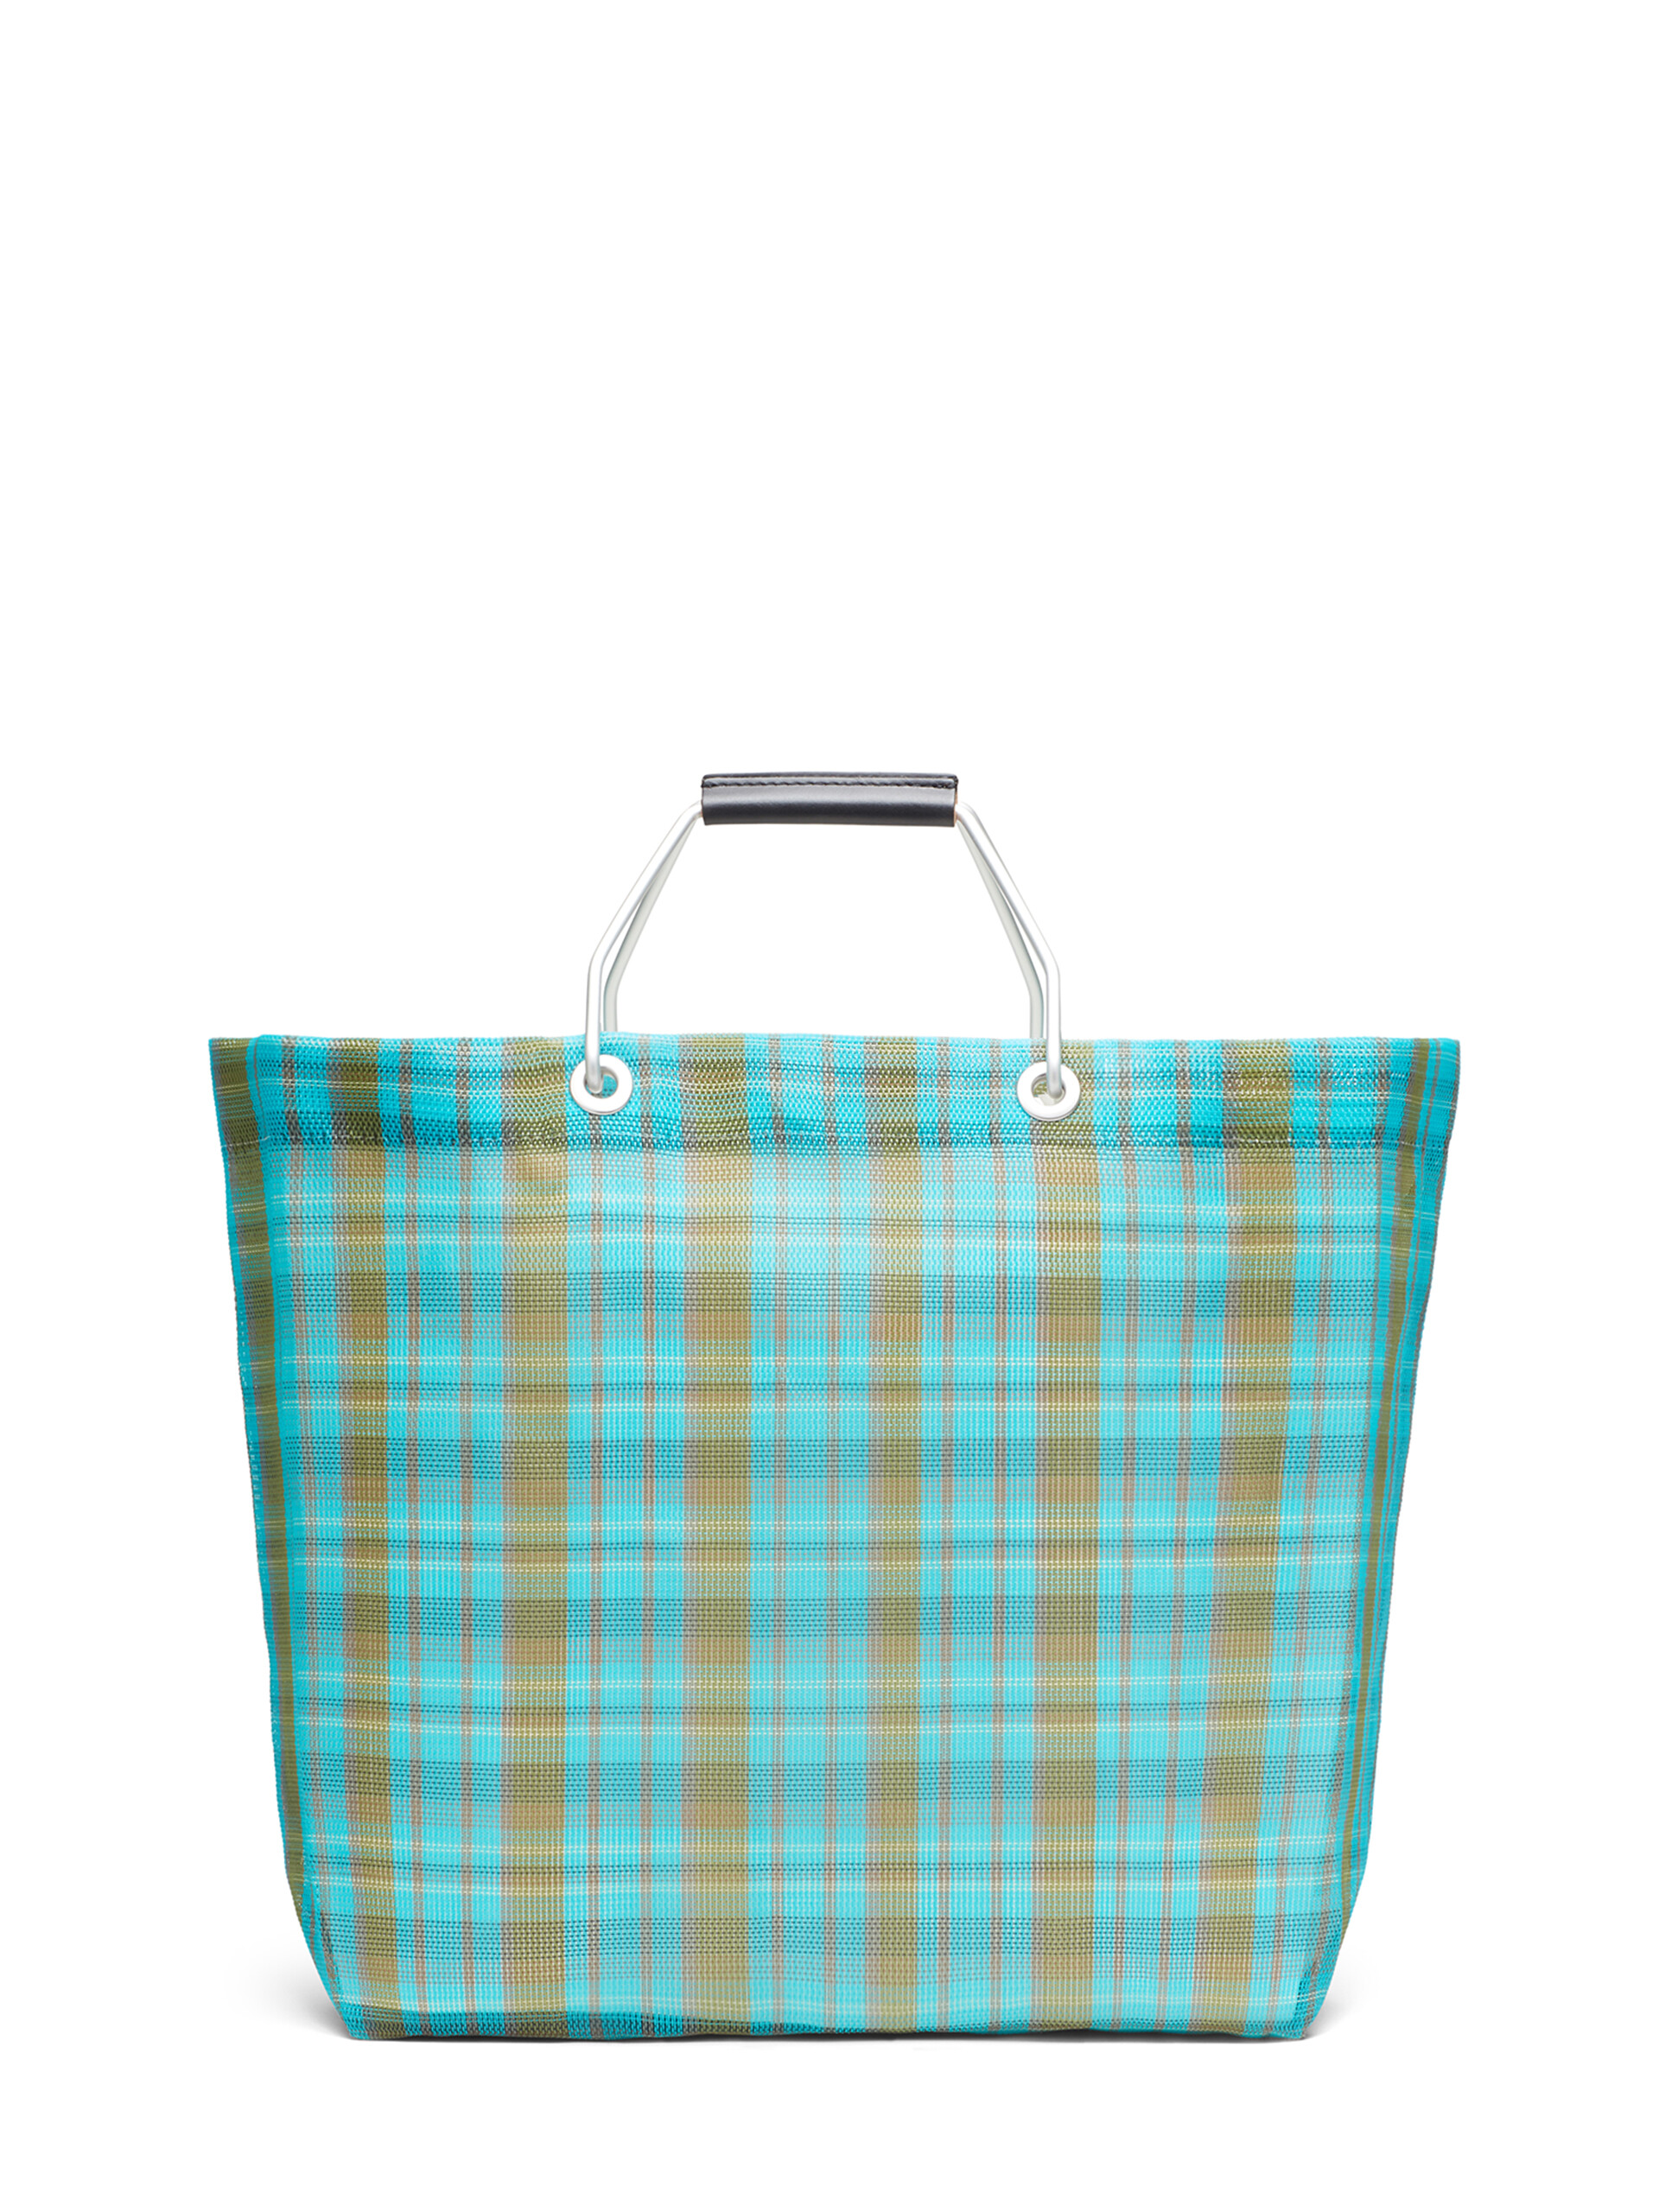 MARNI MARKET bag in pale blue and green - Shopping Bags - Image 3